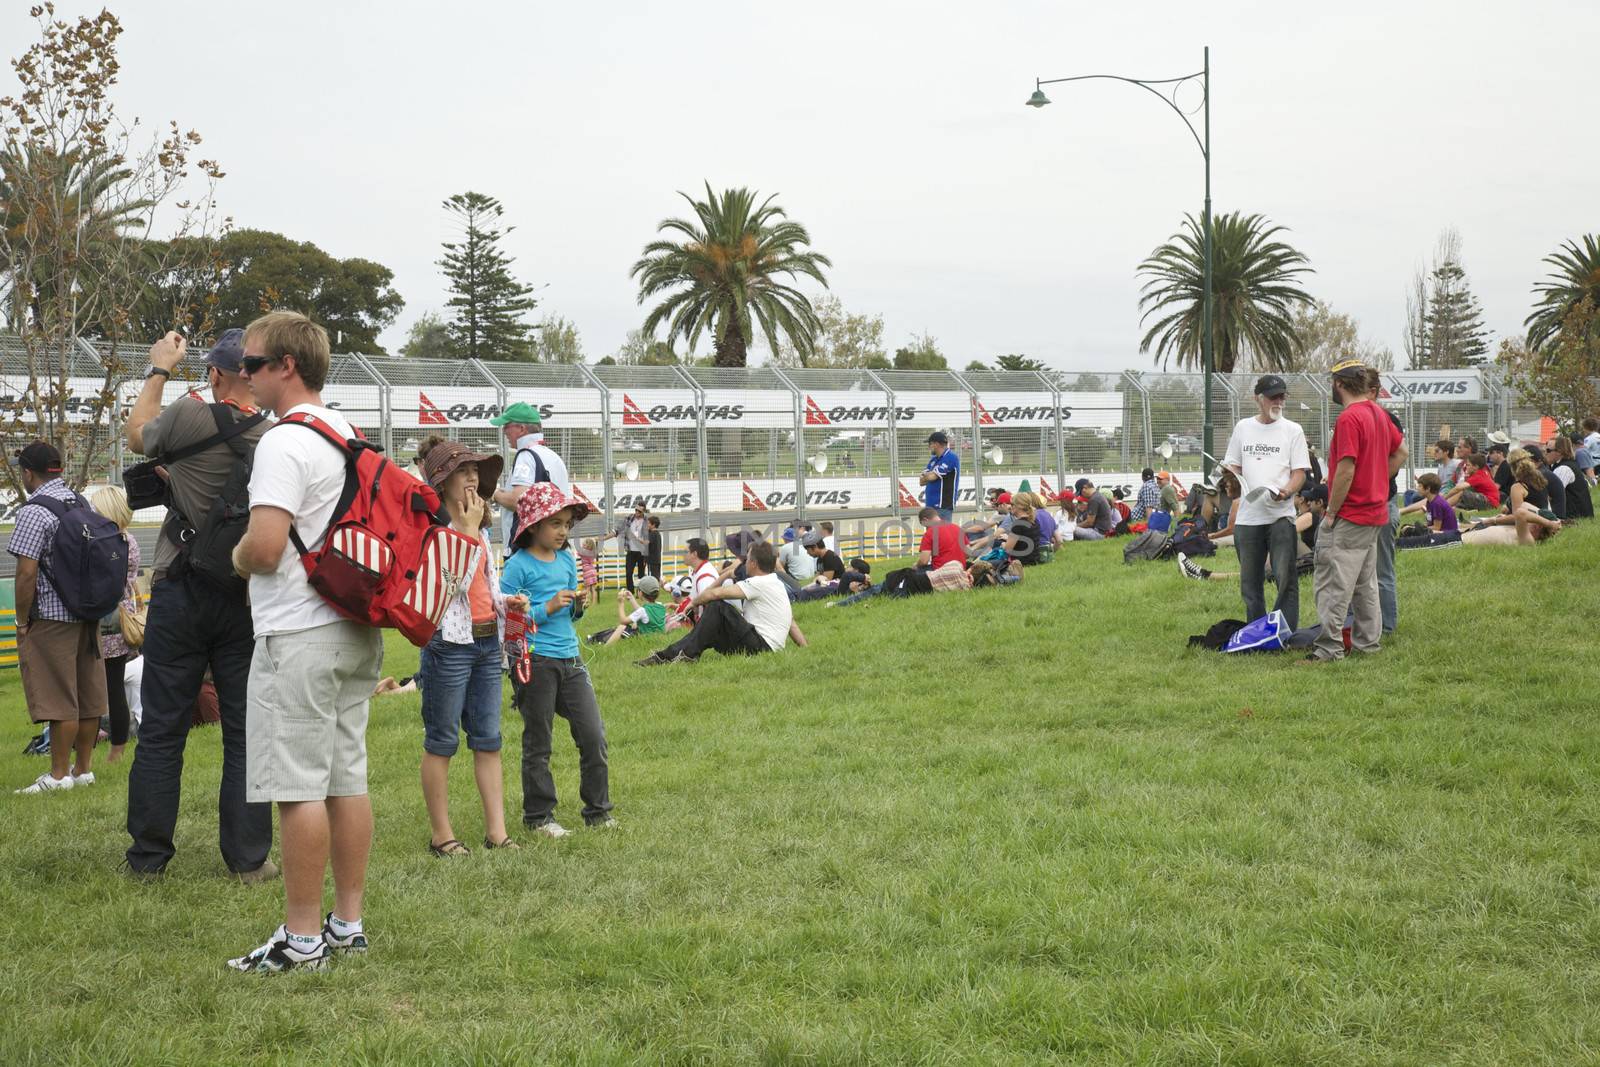 Melbourne 2010 Grand Prix Grounds one of the Viewing Areas, Australia